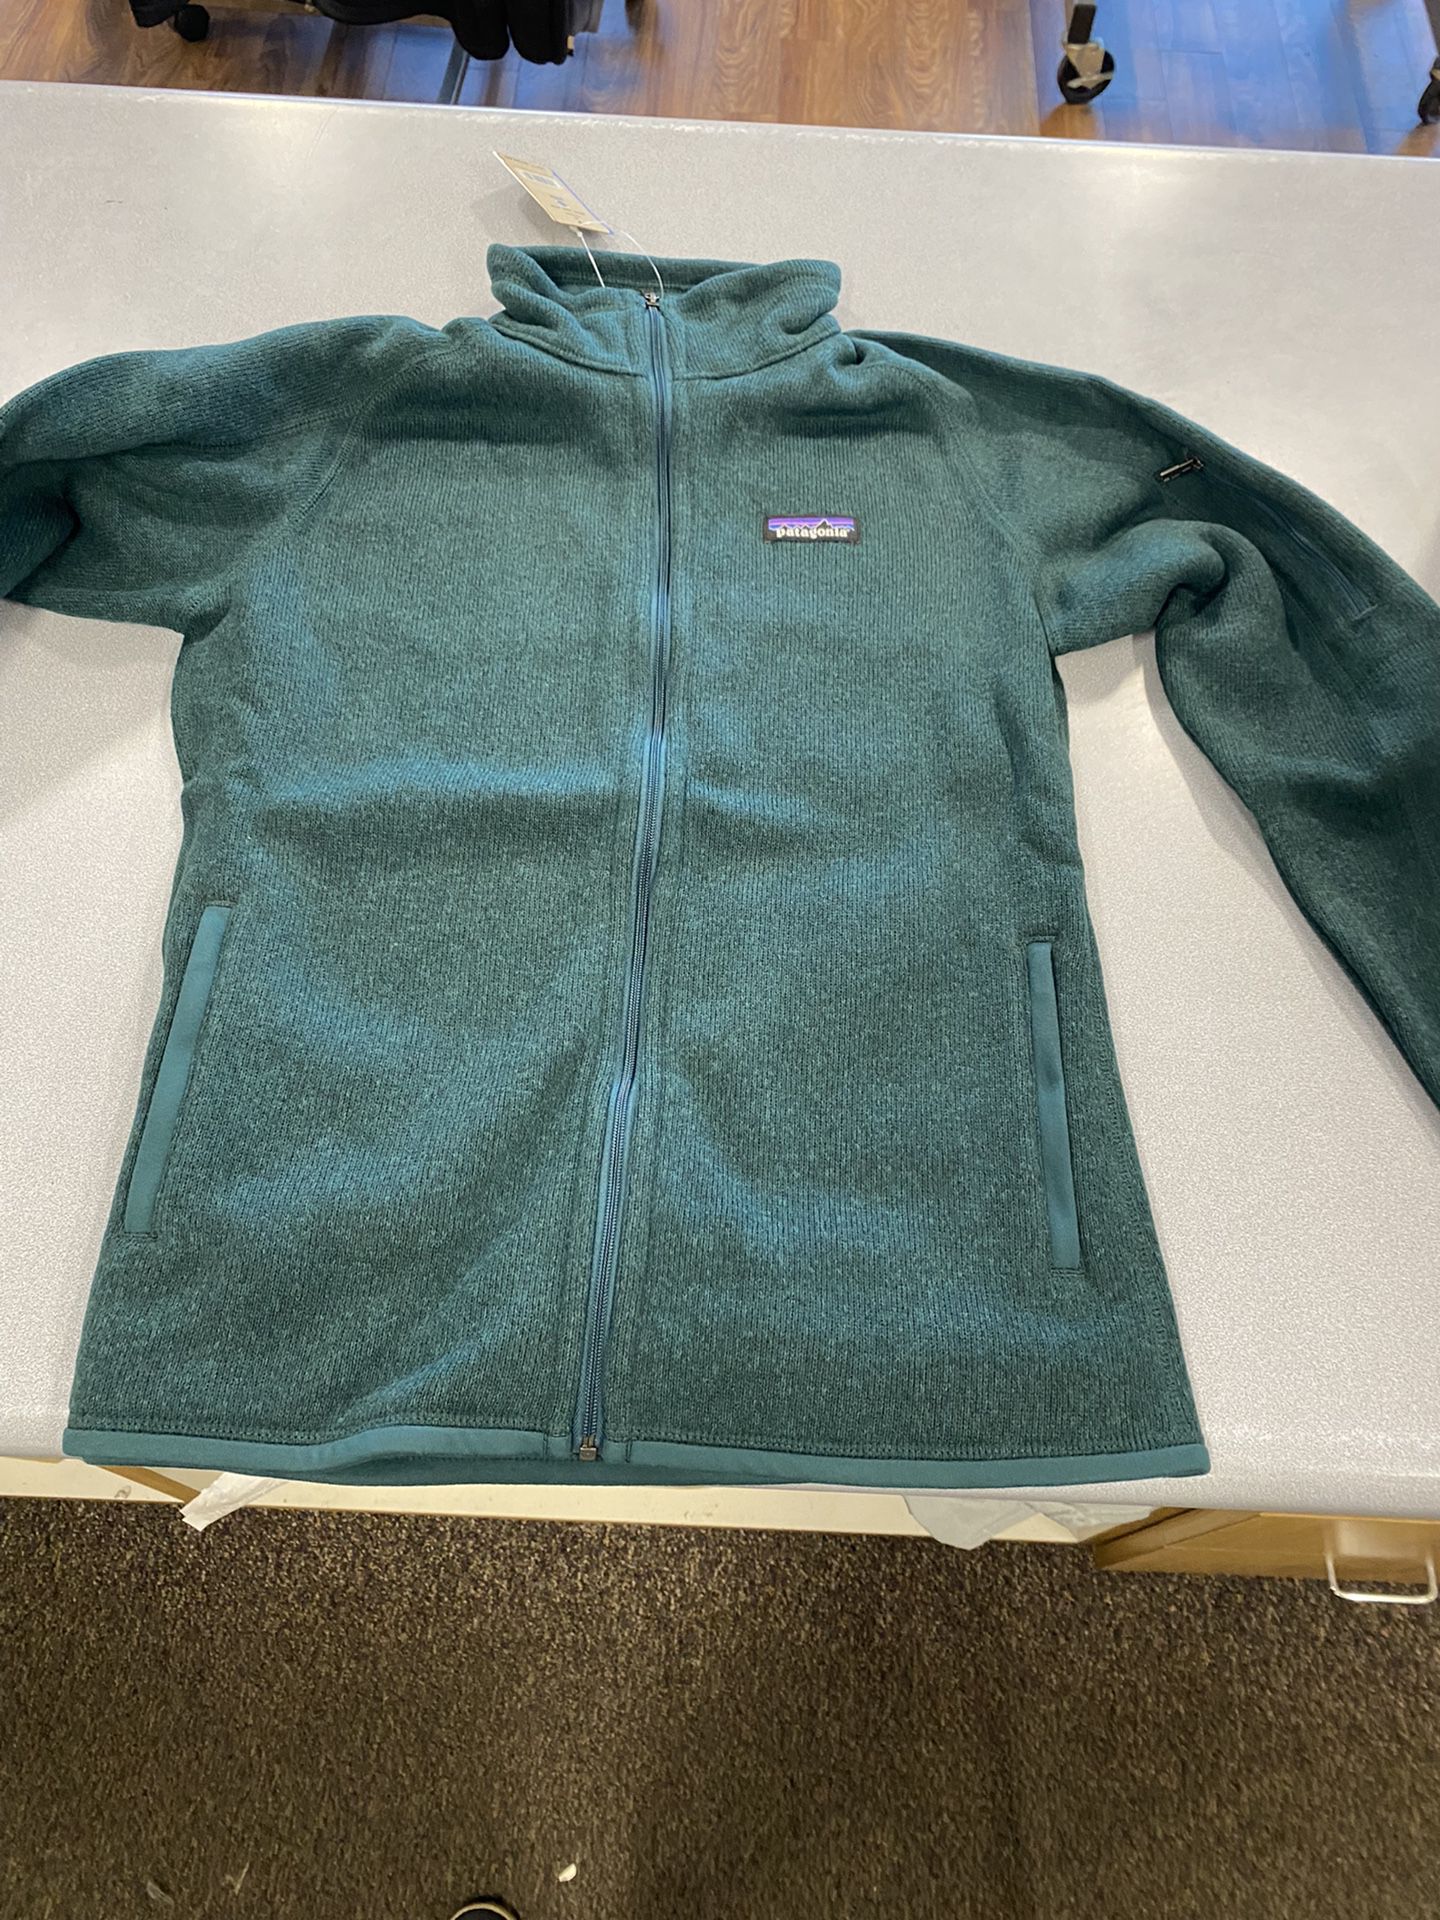 Brand New Patagonia Women’s Small Better jacket $45